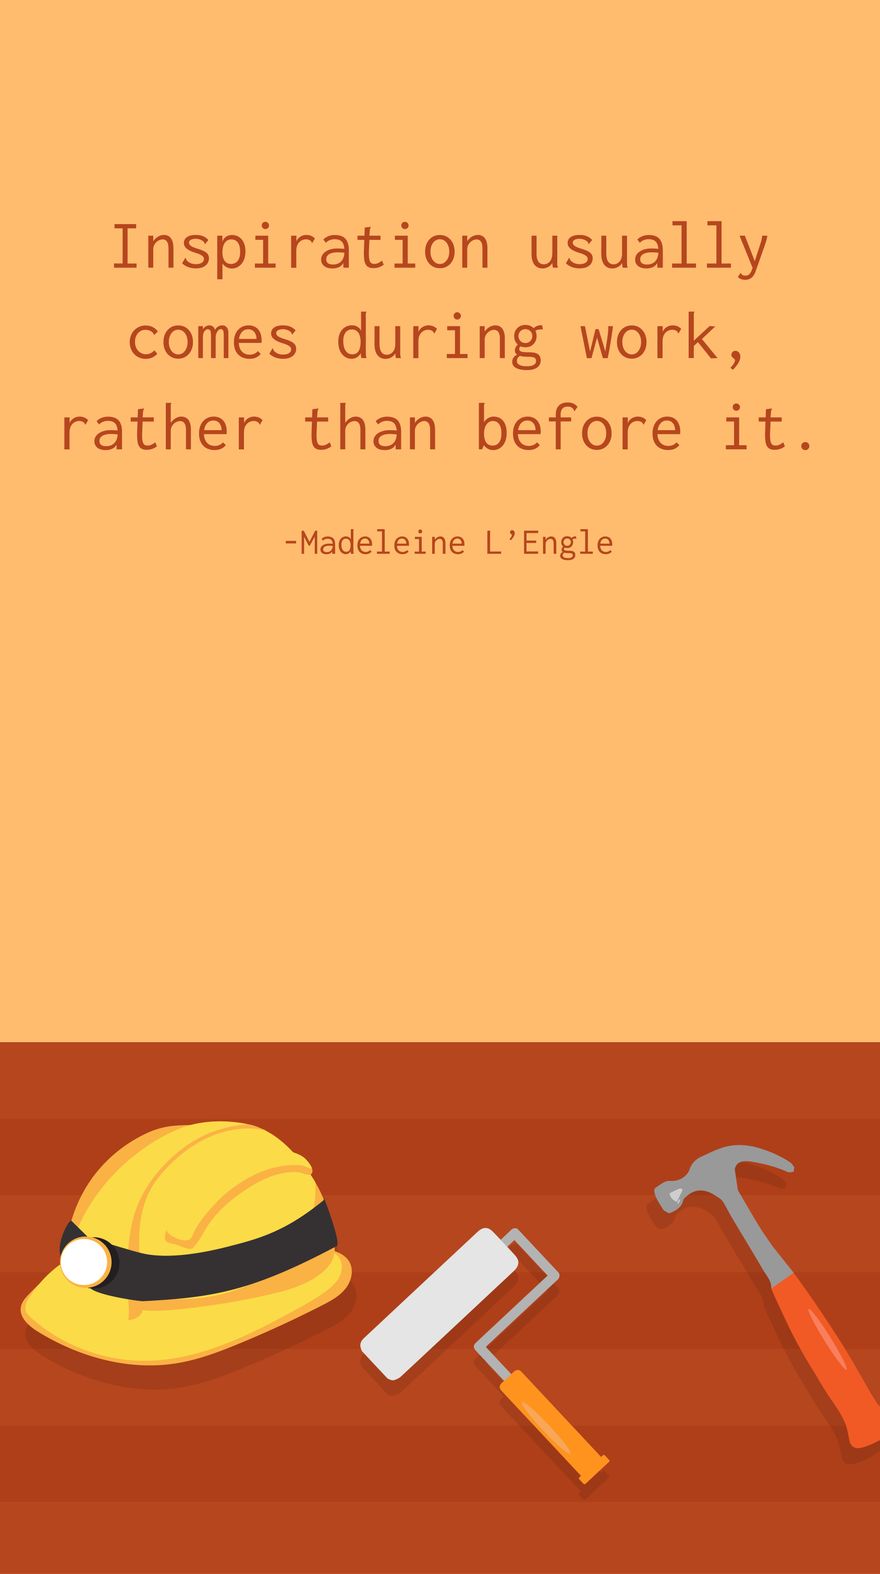 Madeleine L’Engle - Inspiration usually comes during work, rather than before it.